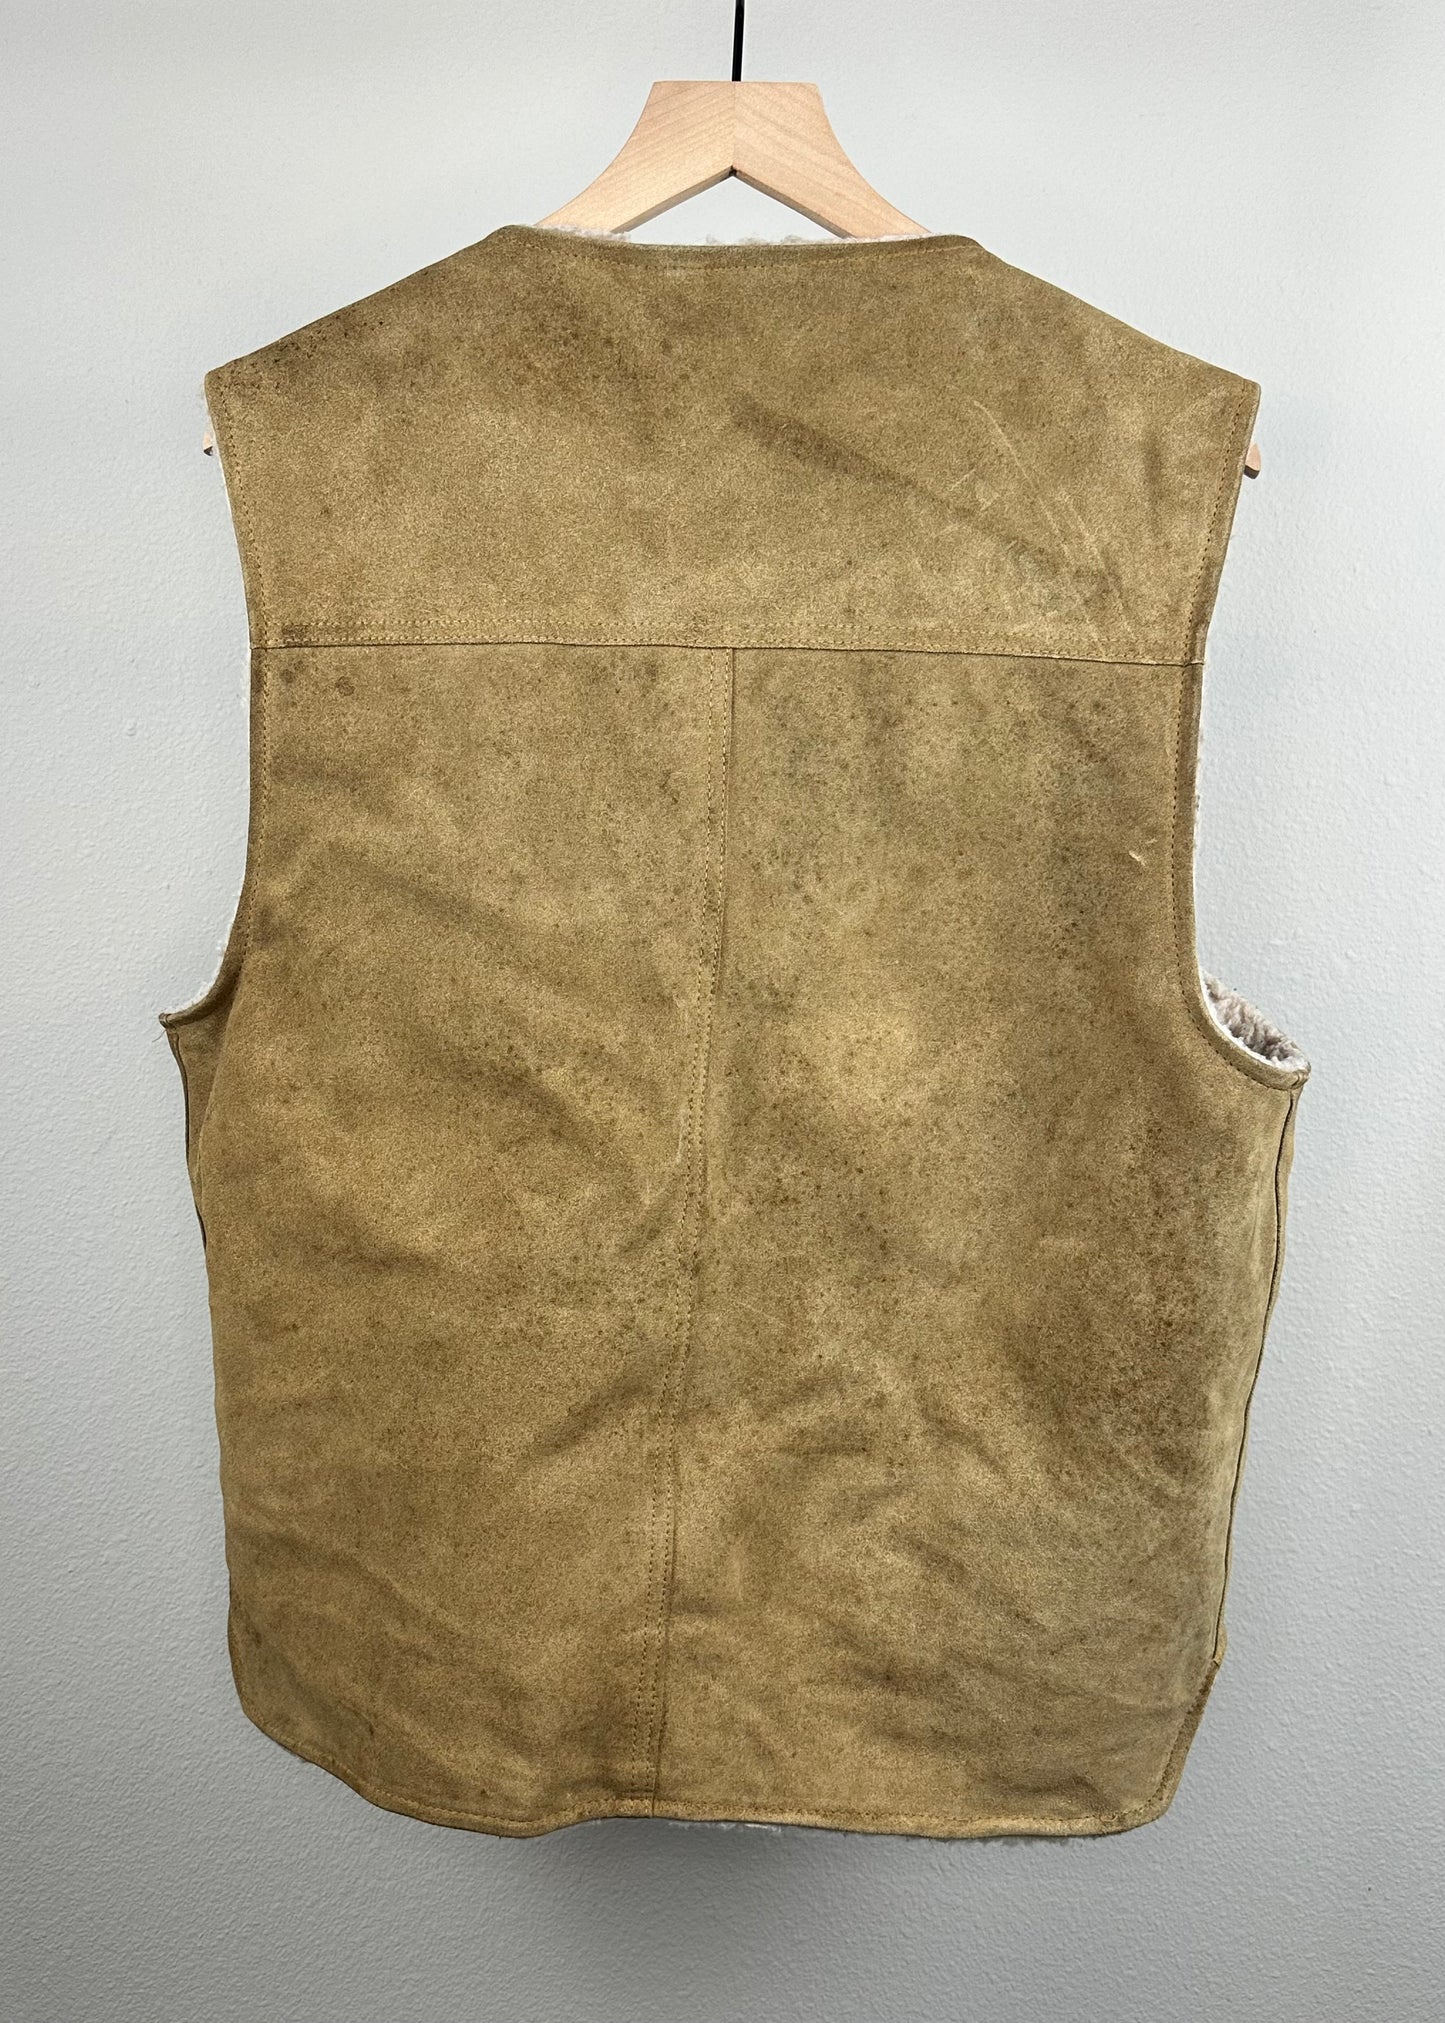 Leather and Wool Vest from Sears